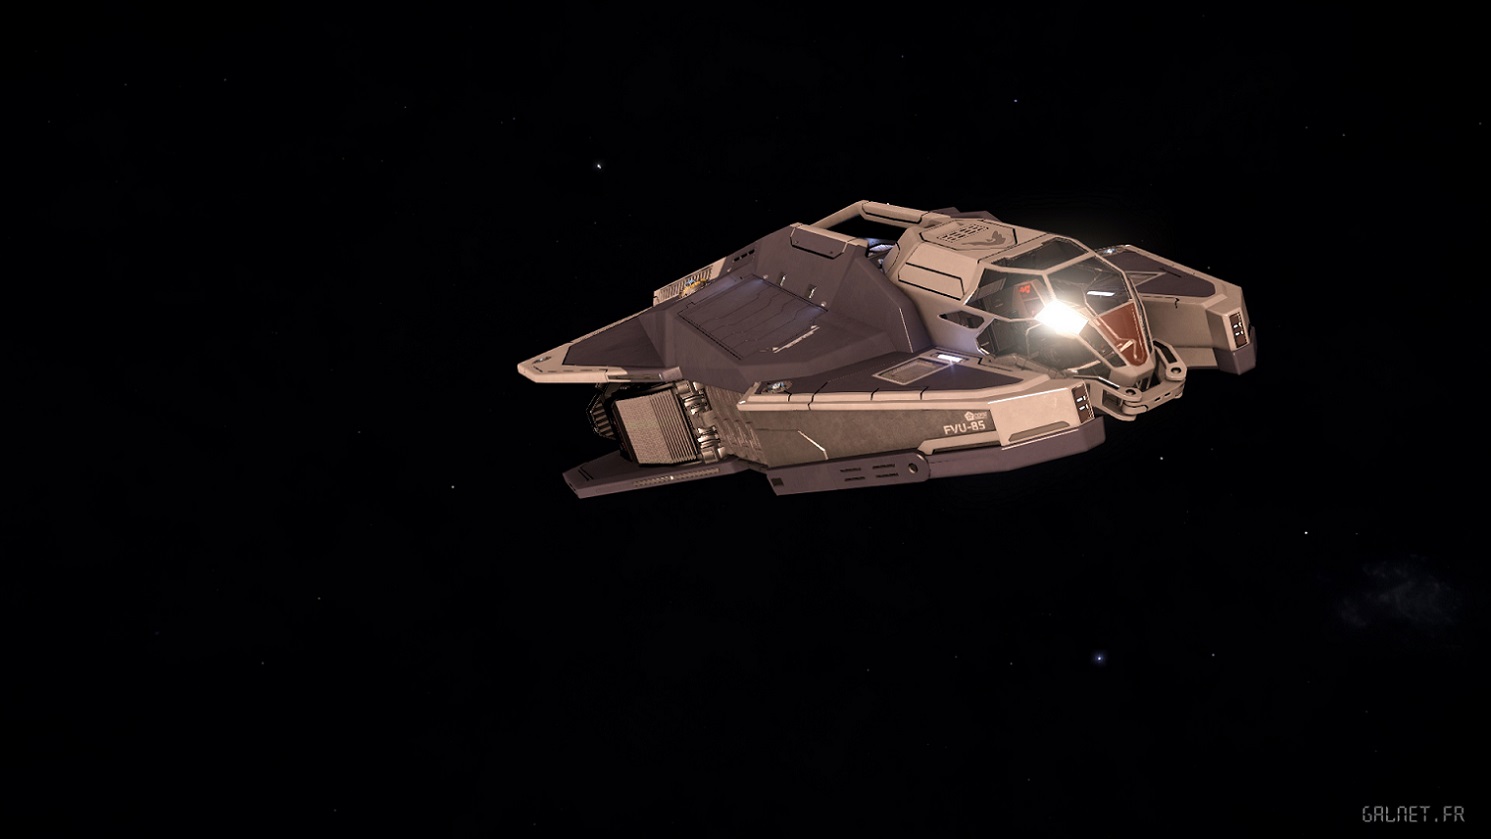 Image of the Vulture from Elite Dangerous